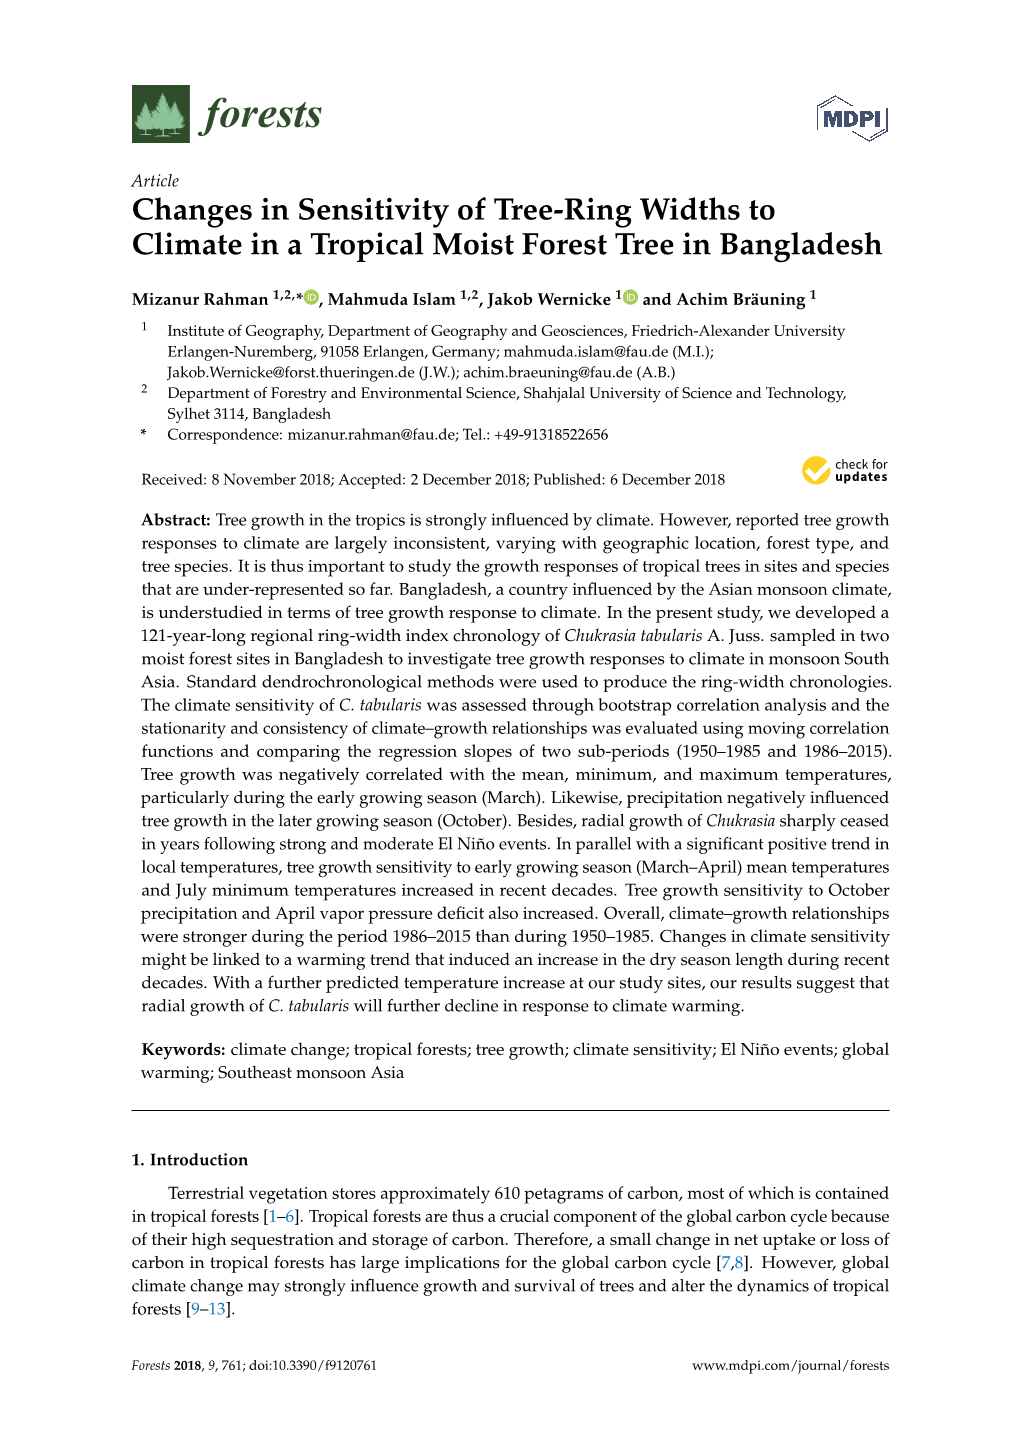 Changes in Sensitivity of Tree-Ring Widths to Climate in a Tropical Moist Forest Tree in Bangladesh